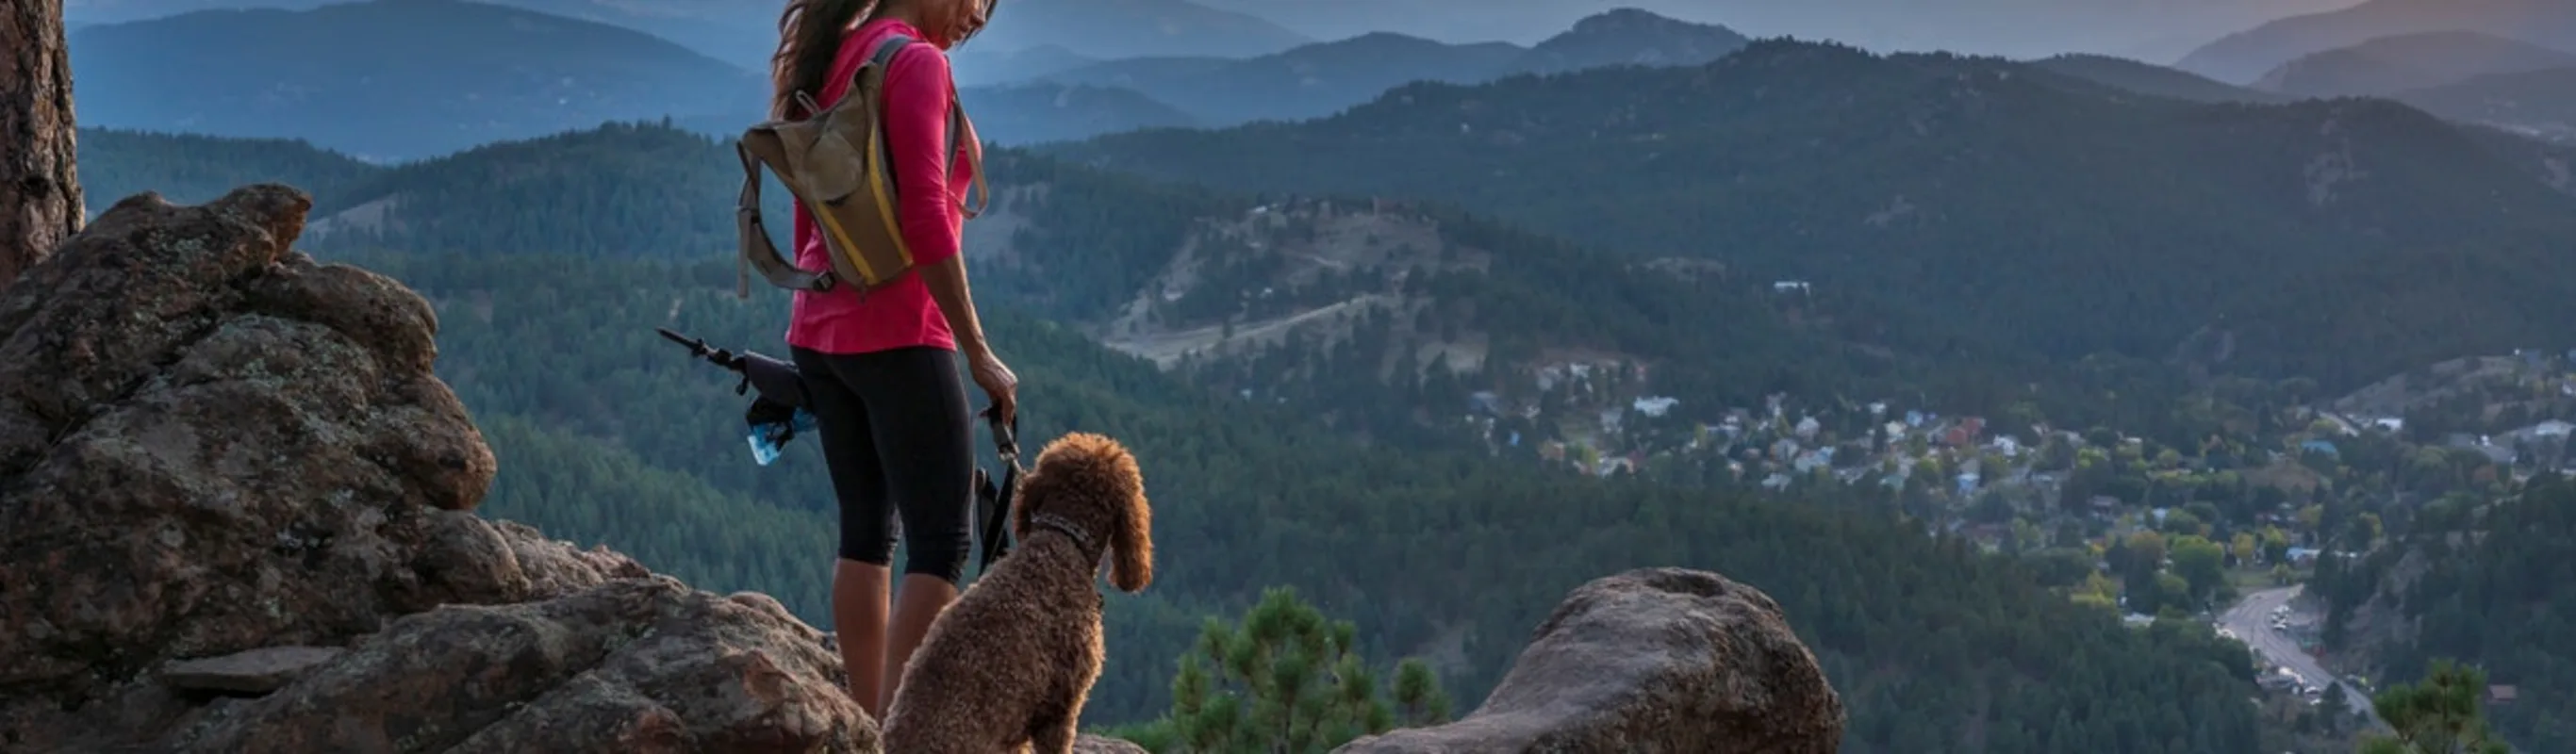 Woman on a hike with dog